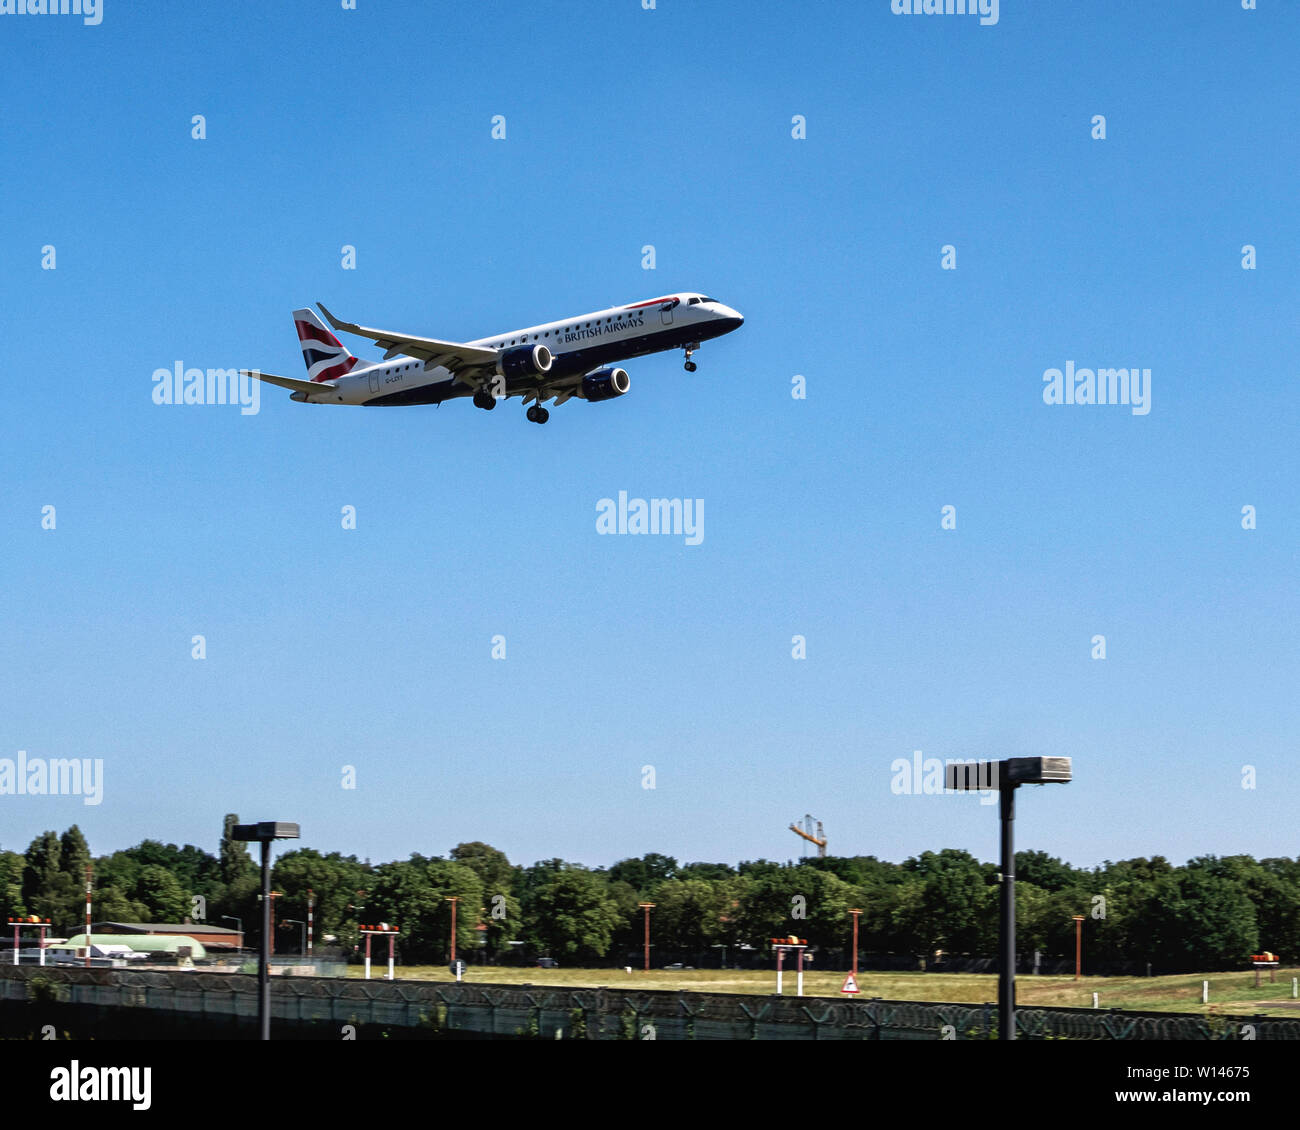 British Airways Plane in the air. Aeroplane approaching Tegel airport & coming in to land, Berlin Stock Photo